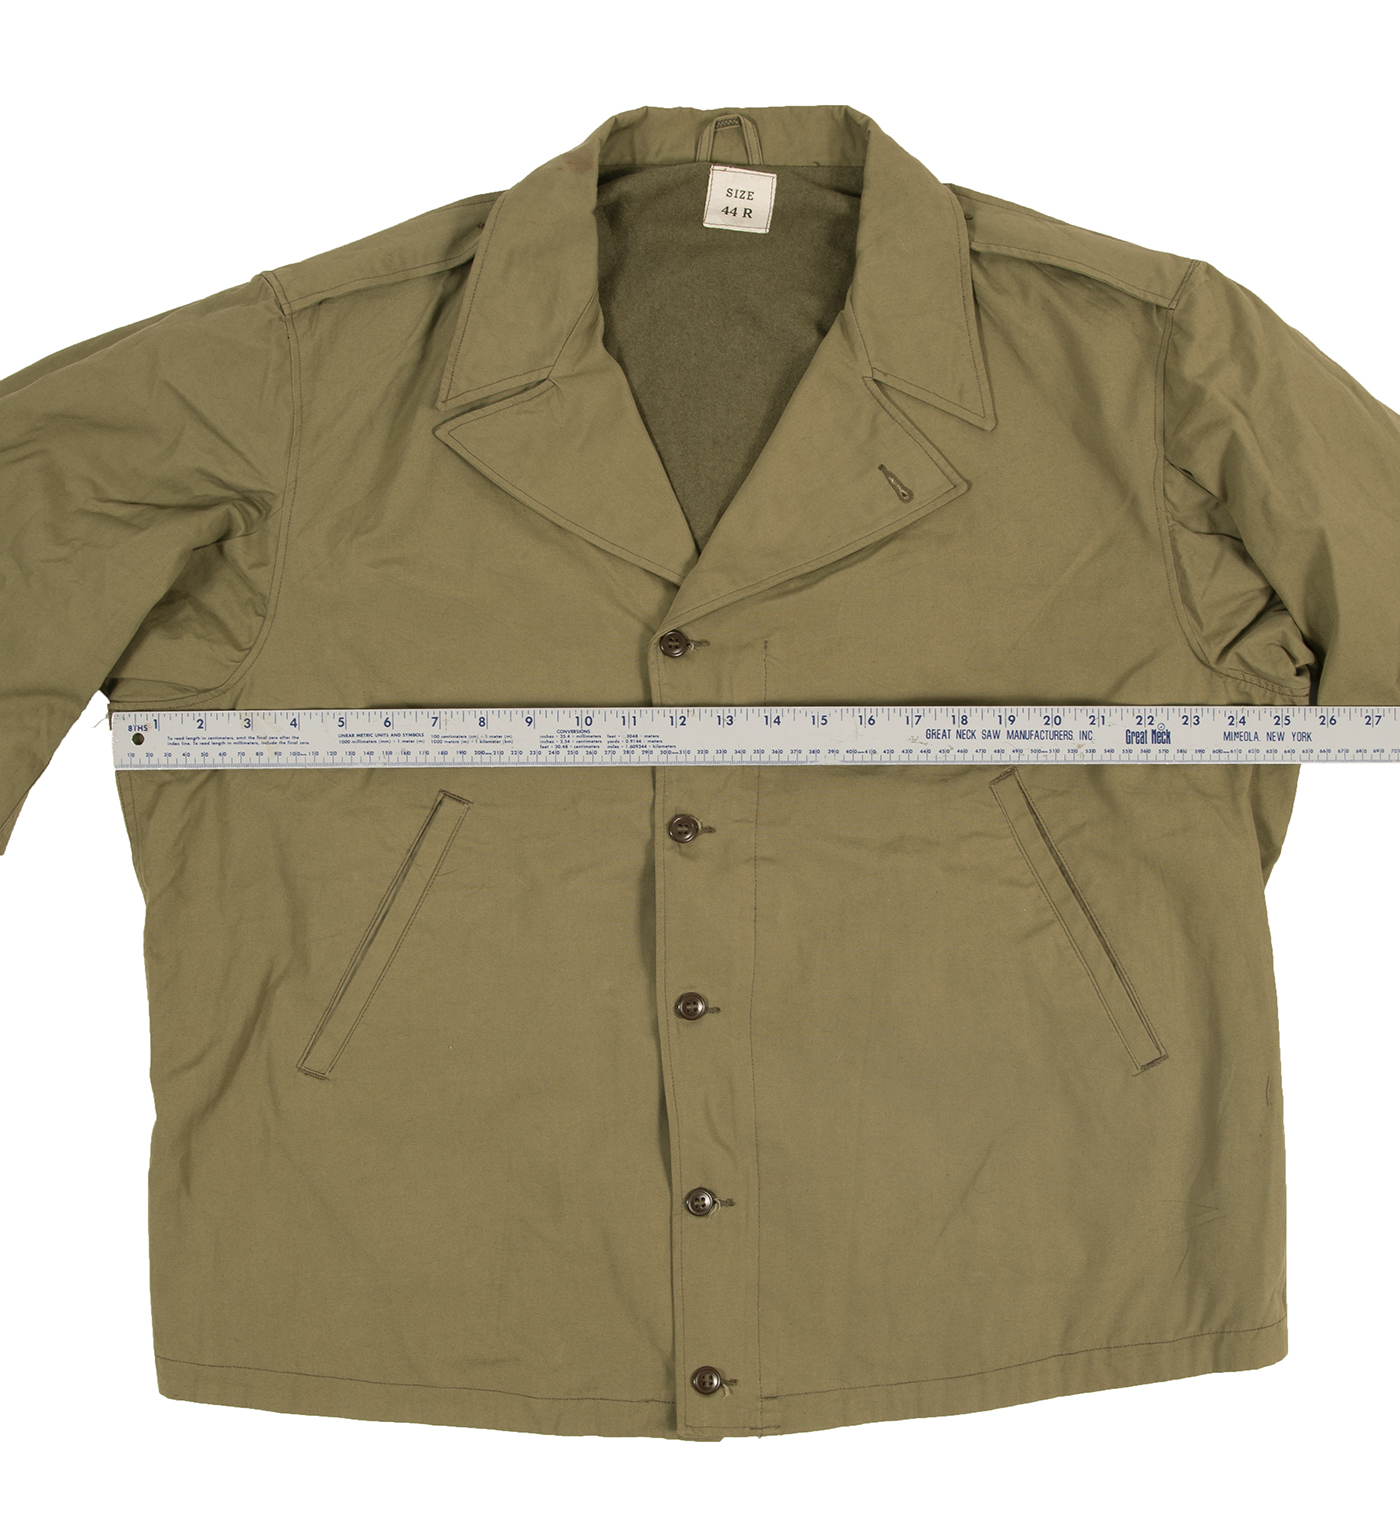 How to determine uniform sizes - At The Front